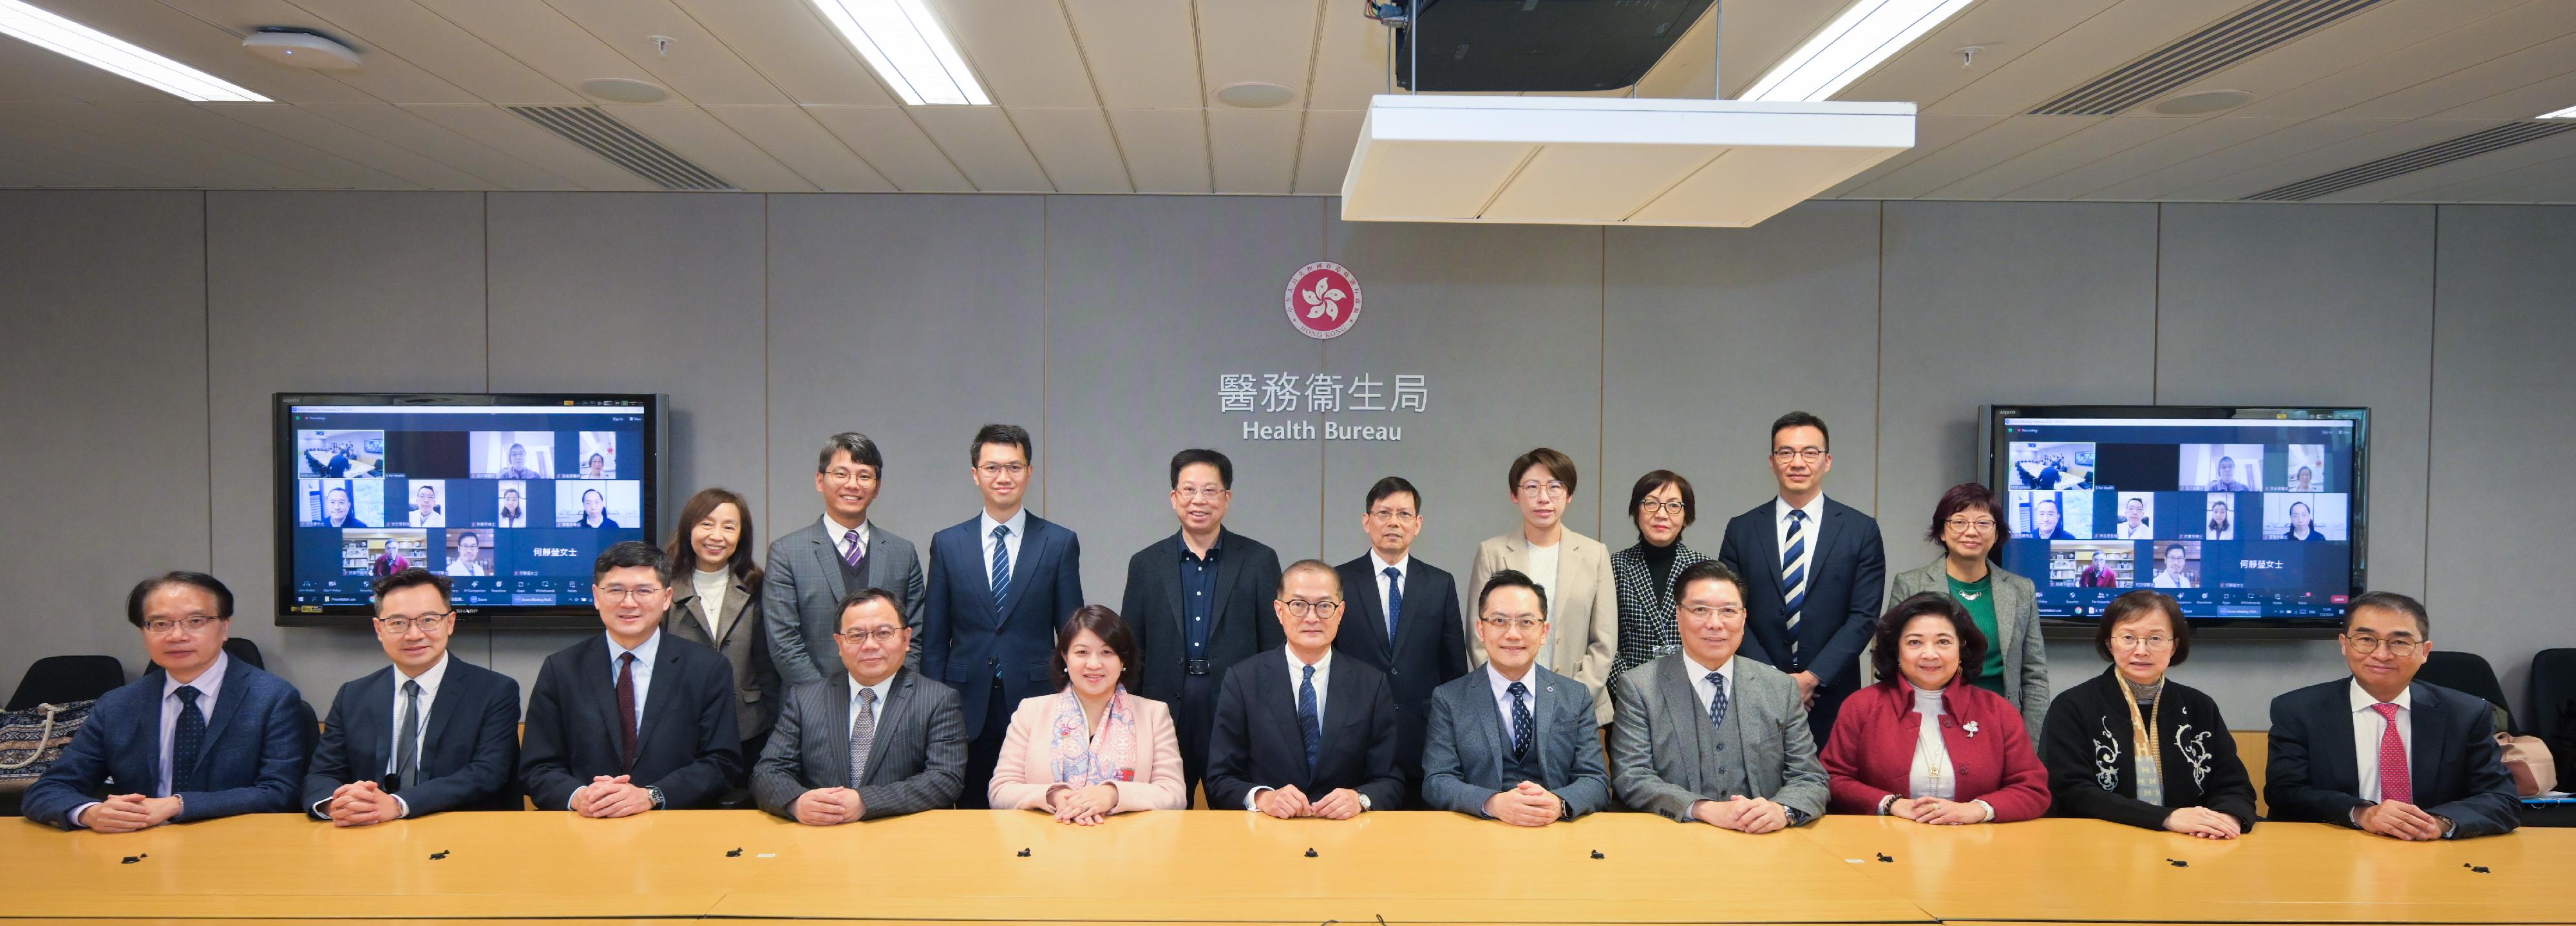 The Secretary for Health, Professor Lo Chung-mau, chaired the 14th meeting of the Chinese Medicine Development Committee today (February 7). Photo shows Professor Lo (front row, centre); the Under Secretary for Health, Dr Libby Lee (front row, fifth left); the Director of Health, Dr Ronald Lam (front row, fifth right); the Project Director of the Chinese Medicine Hospital Project Office, Dr Cheung Wai-lun (front row, first left); the Chief Executive of the Hospital Authority, Dr Tony Ko (front row, third left), and other attending representatives of the relevant government departments and organisations.